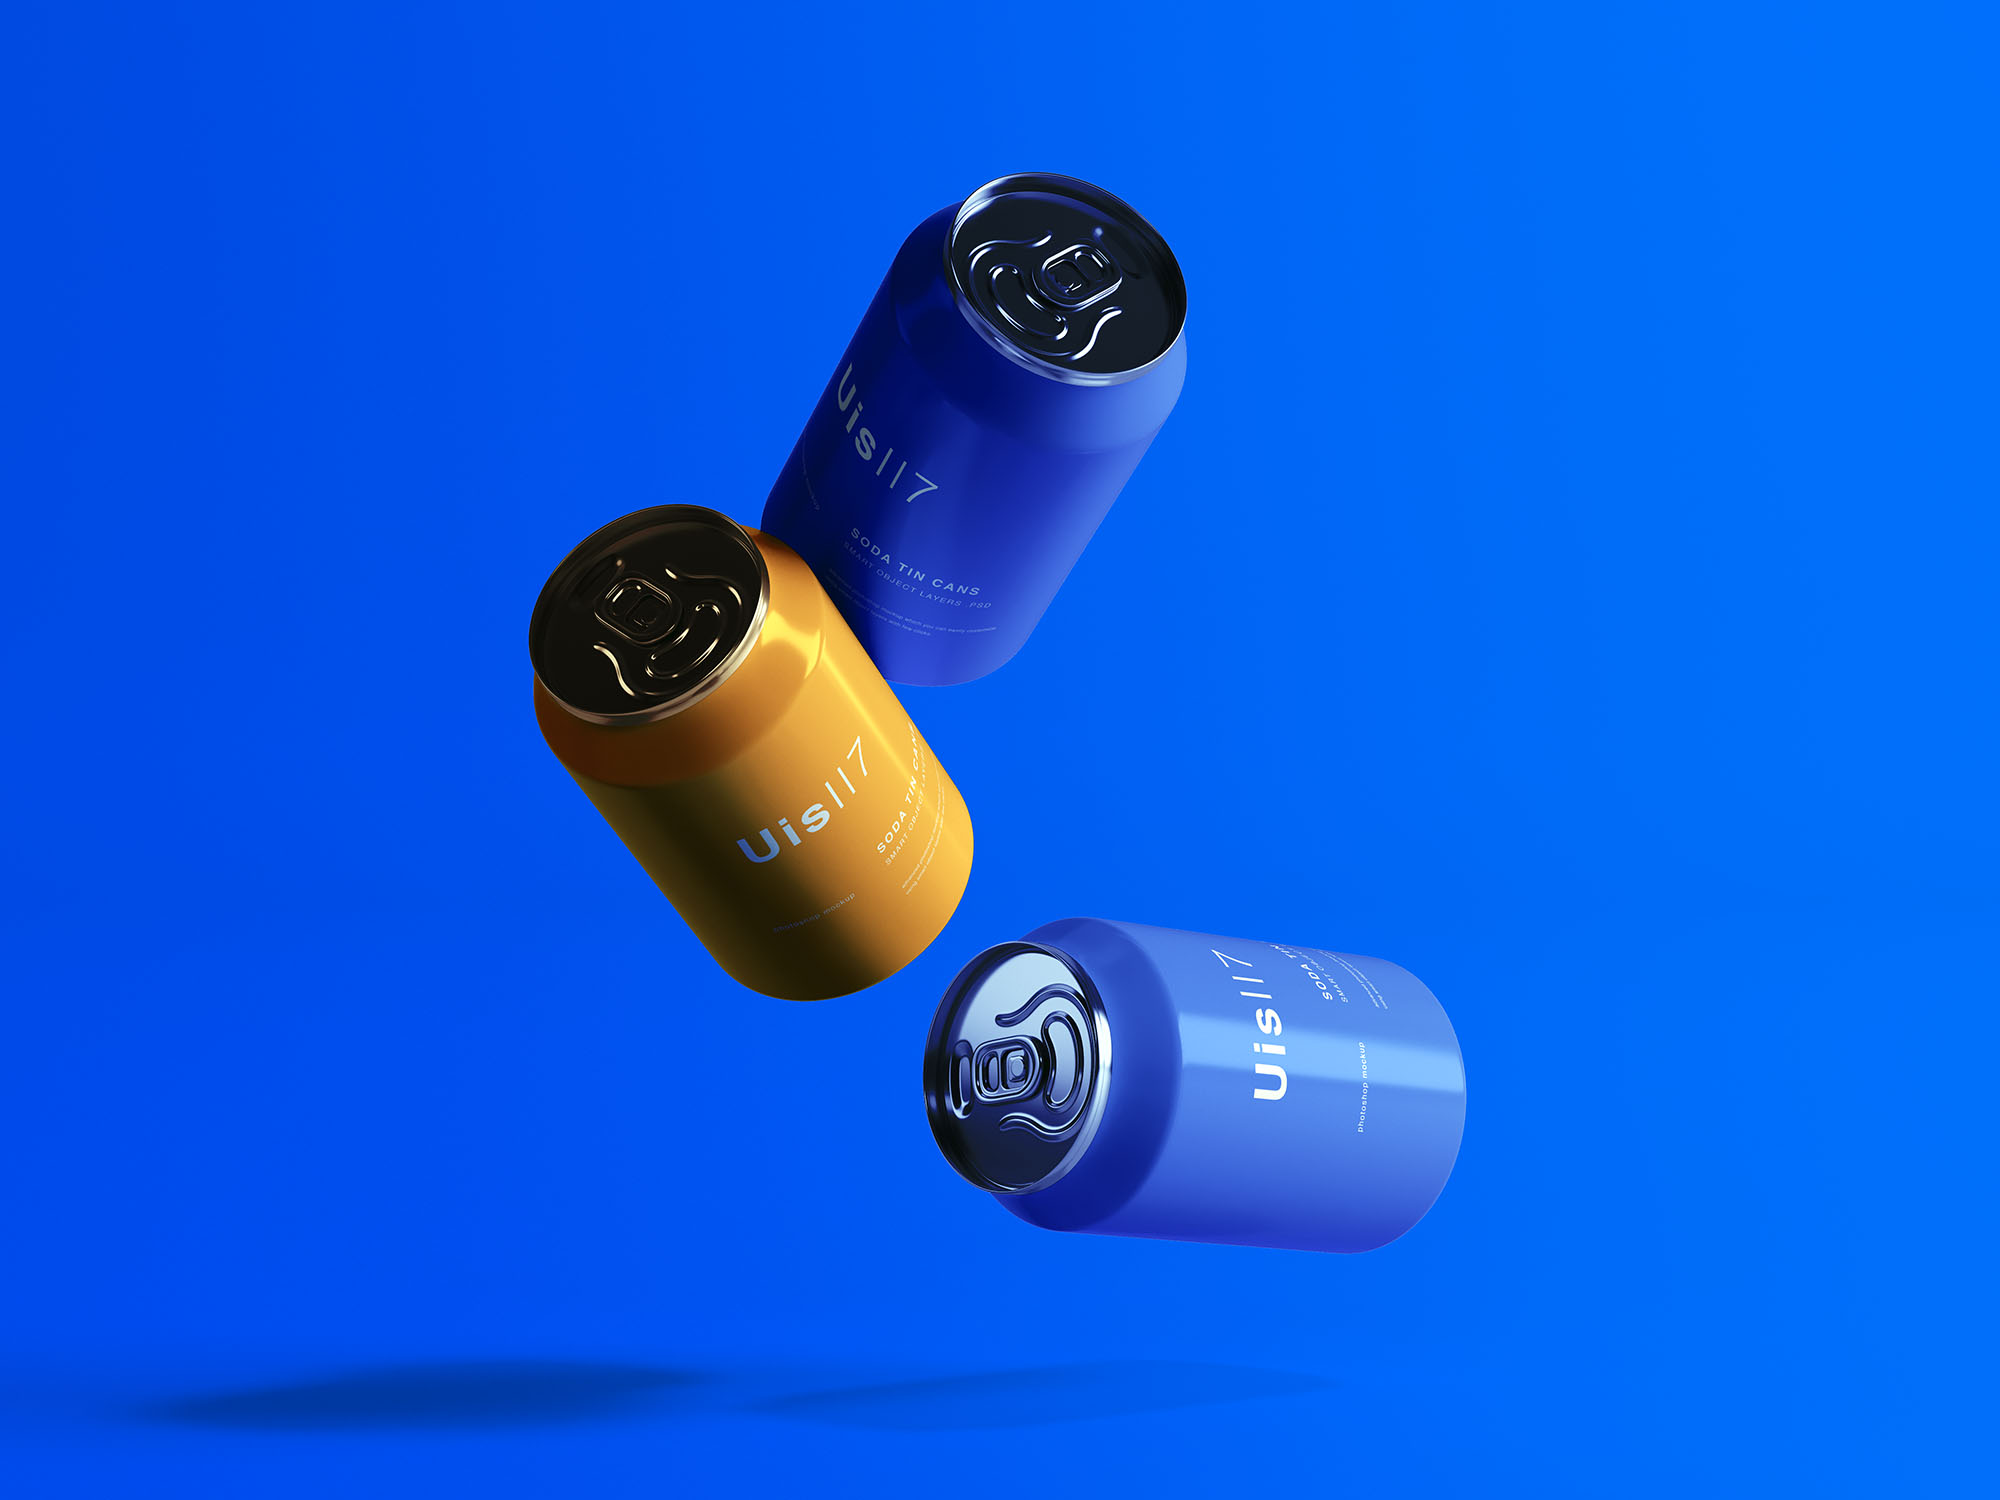 mockup of cans with a logo on them